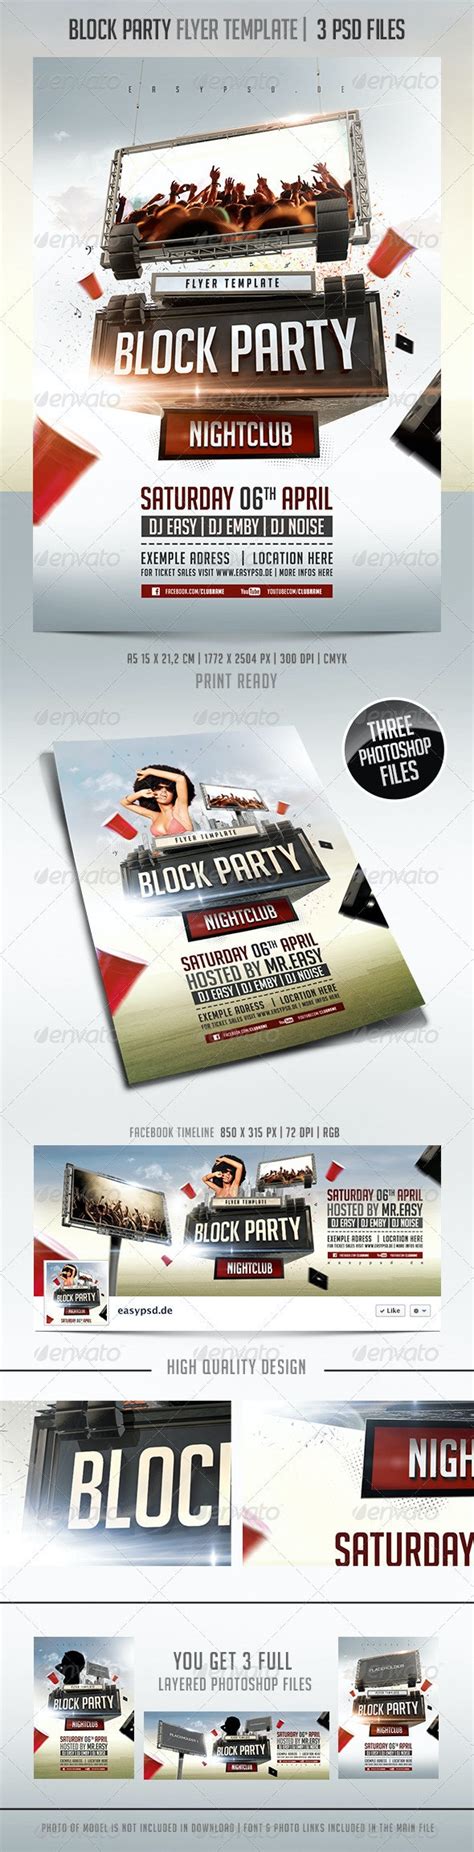 block party flyer template  pixelfrei graphicriver